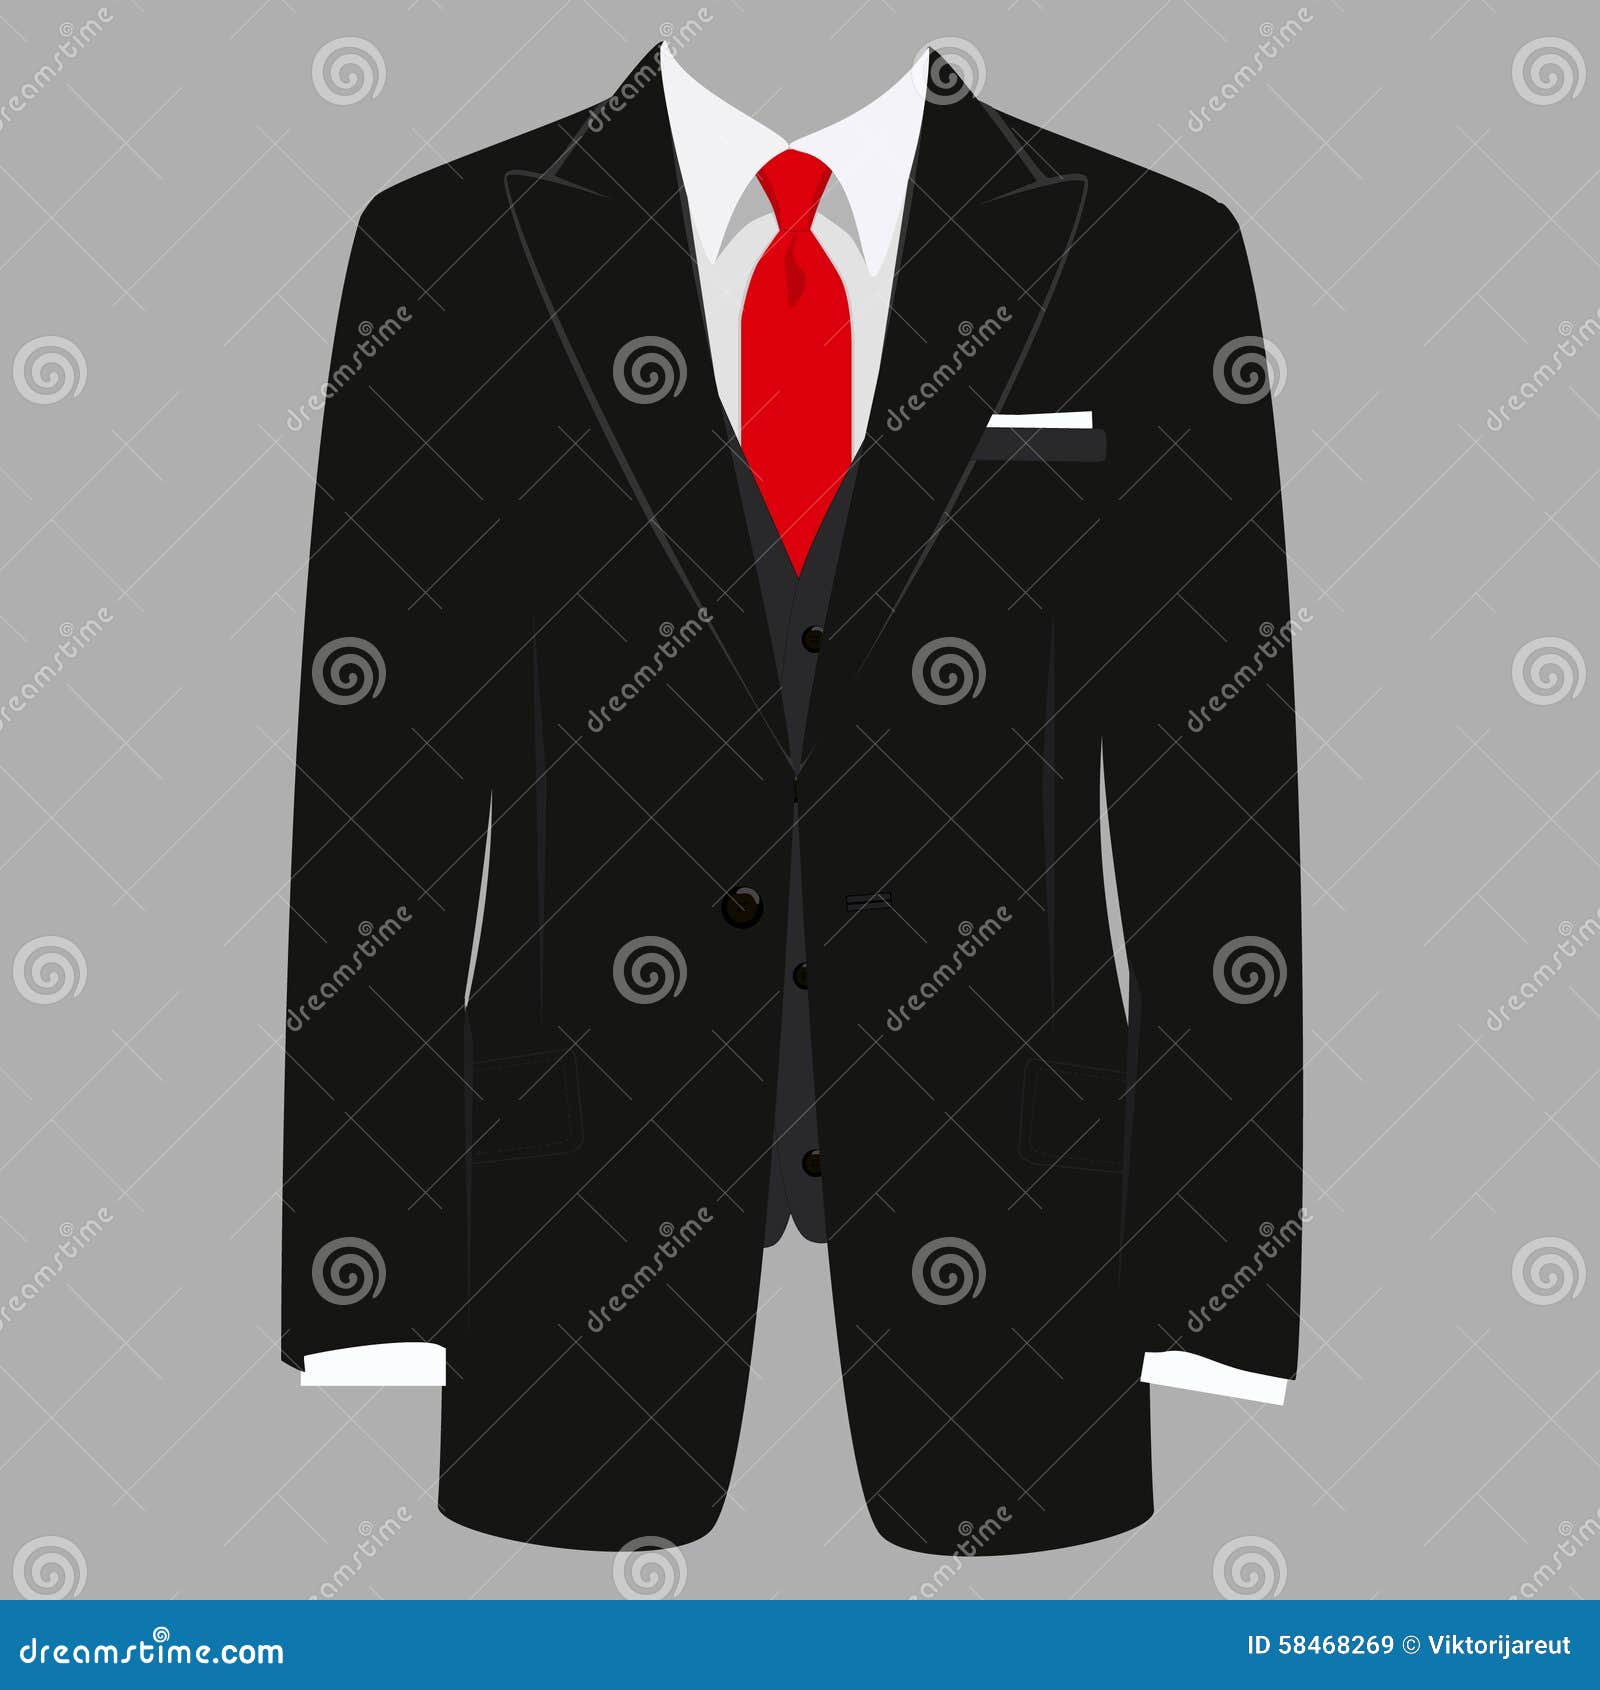 Red tie white shirt and black suit Royalty Free Vector Image